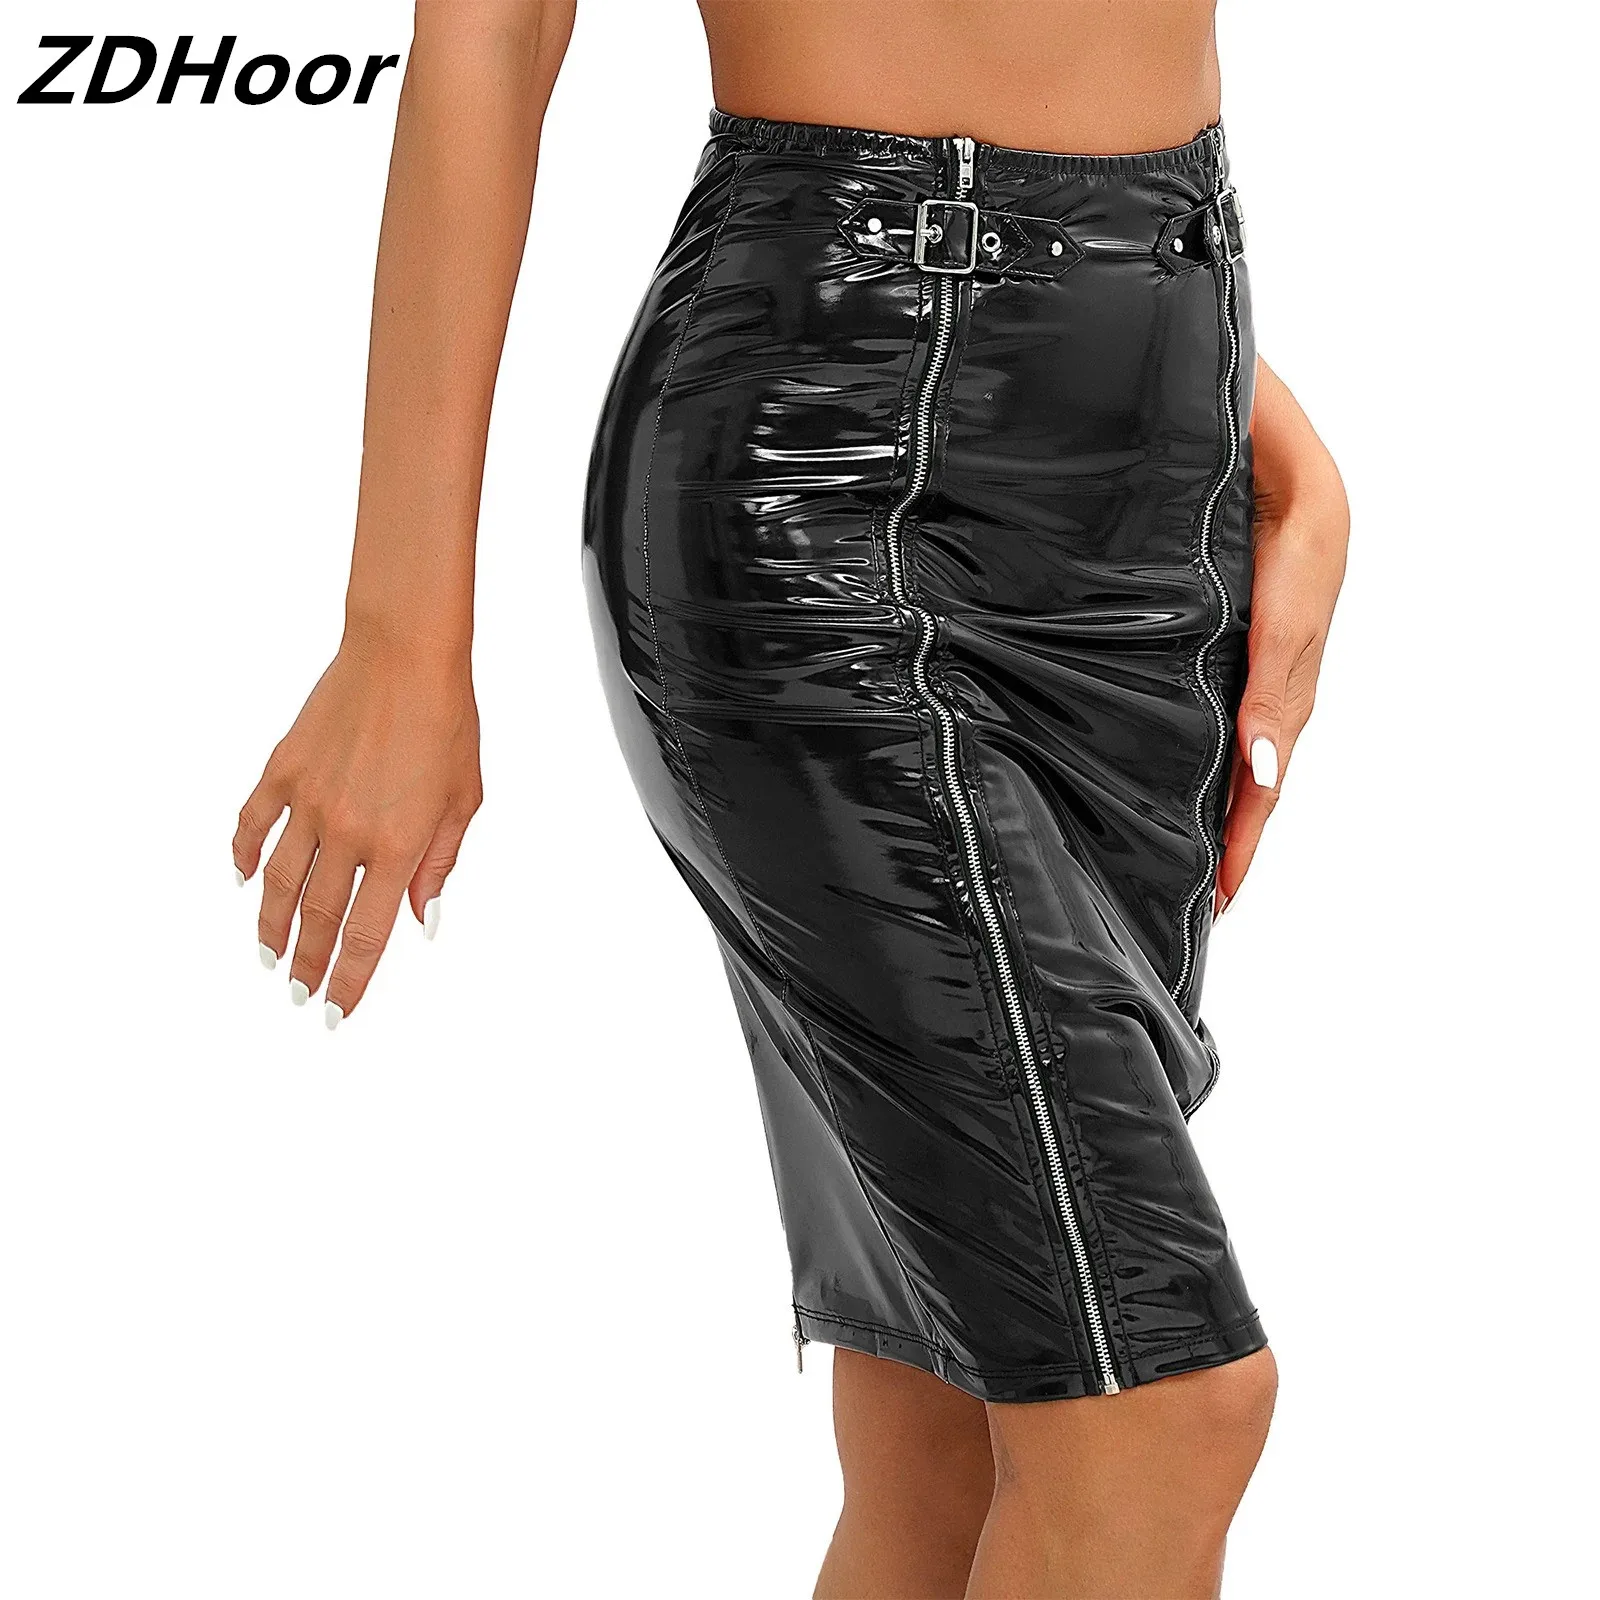 Womens Sexy Zipper Metal Buckle Skirt Wet Look Patent Leather High Waist Fashion Bodycon Skirts for Party Nightclub